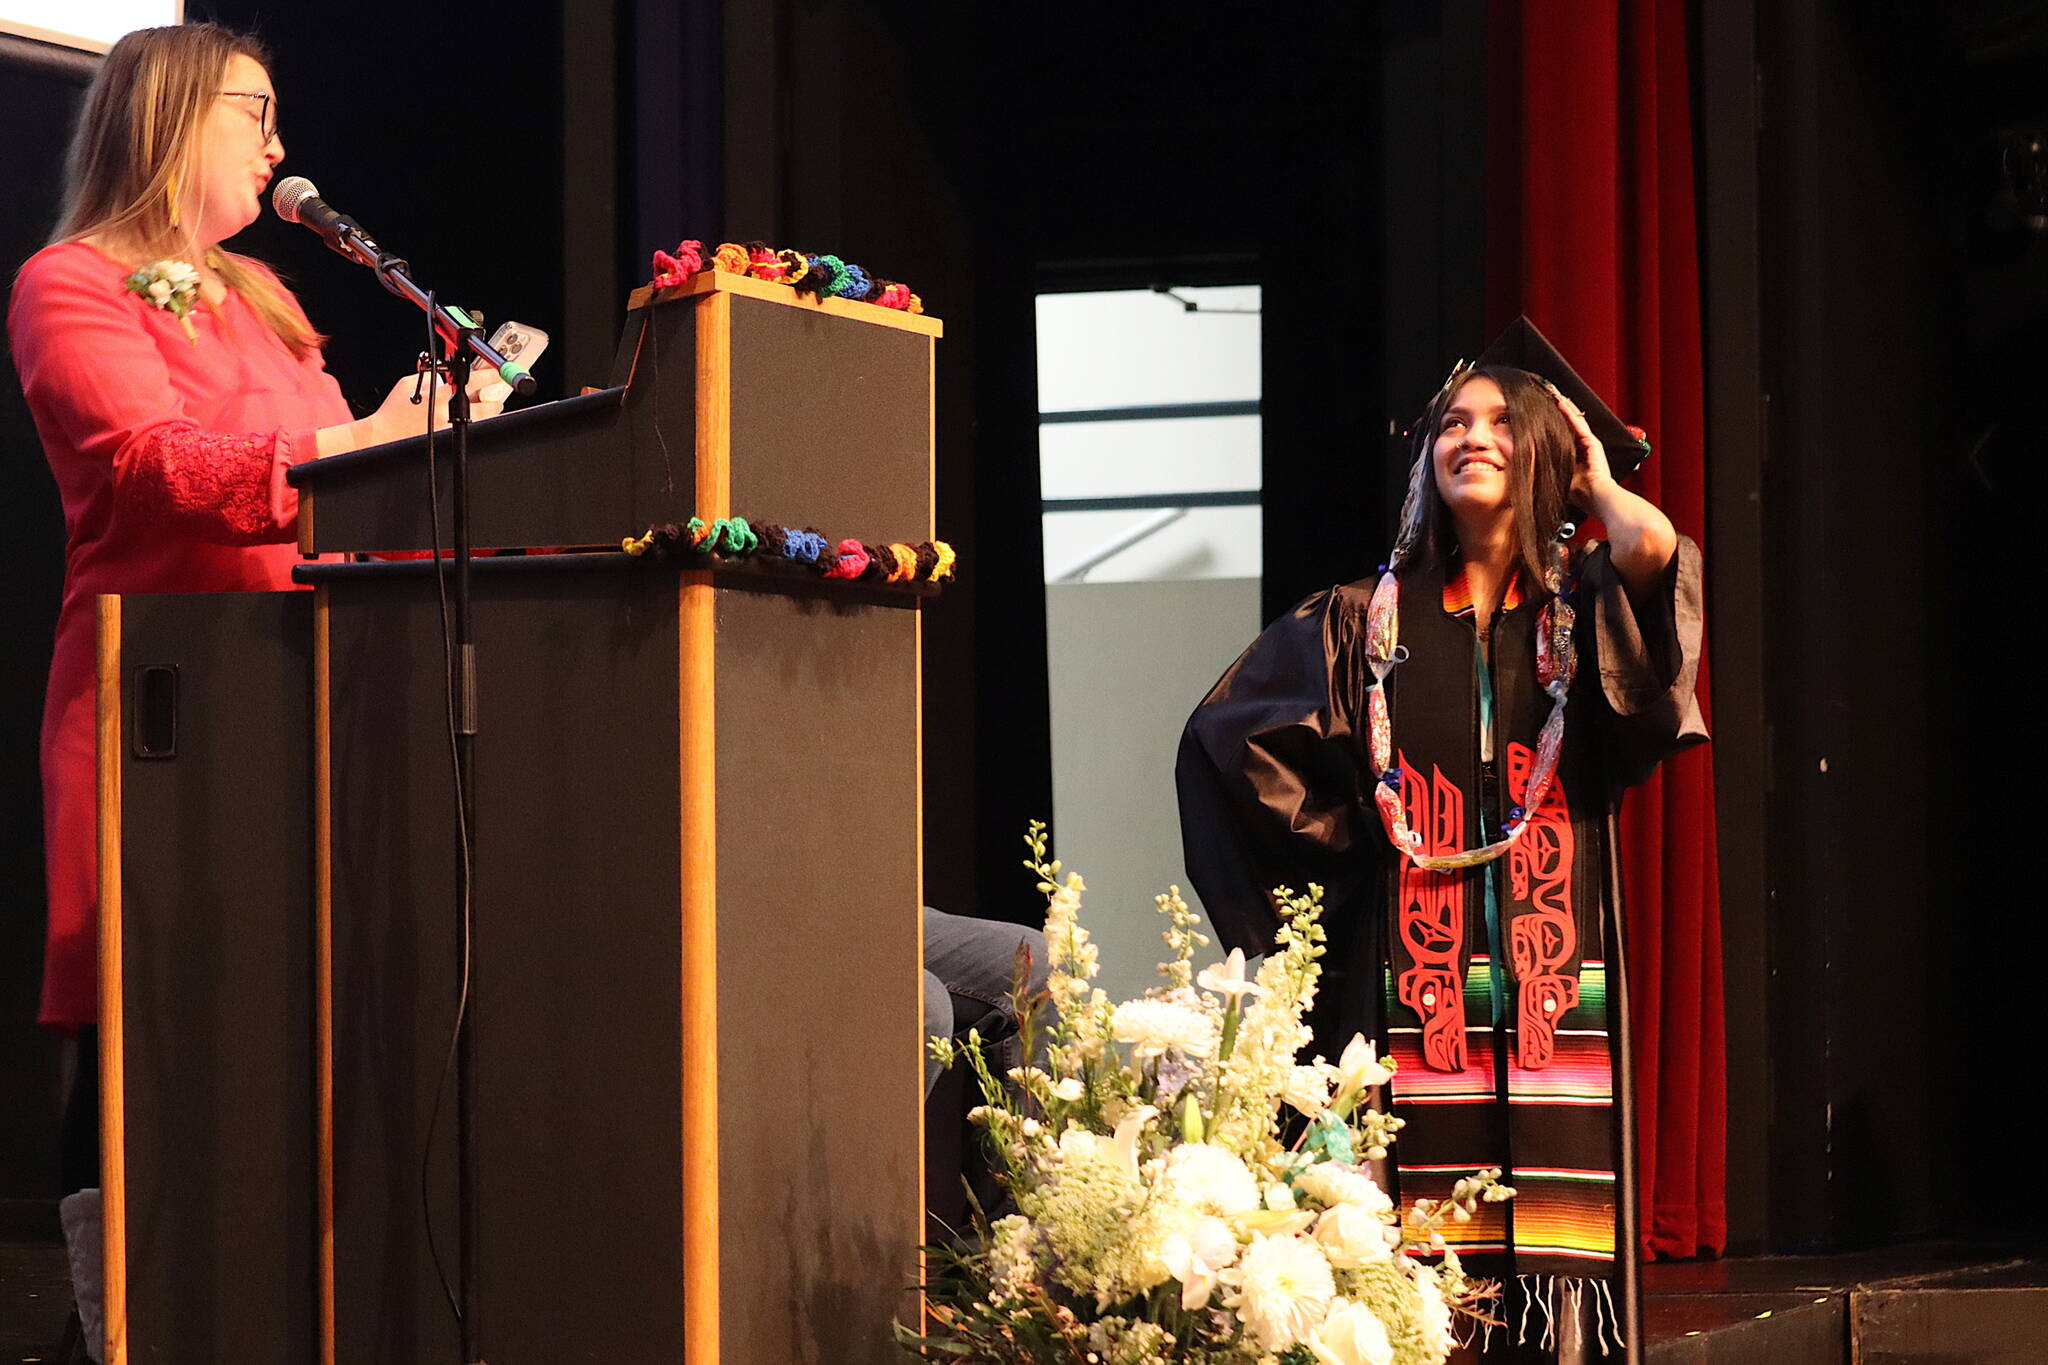 Sierra Guerro-Flores (right) listens to her advisor Electra Gardinier after being presented with her diploma at Yaaḵoosgé Daakahídi High School’s graduation ceremony Sunday in the Juneau-Douglas High School: Yadaa.at Kalé auditorium. (Mark Sabbatini / Juneau Empire)